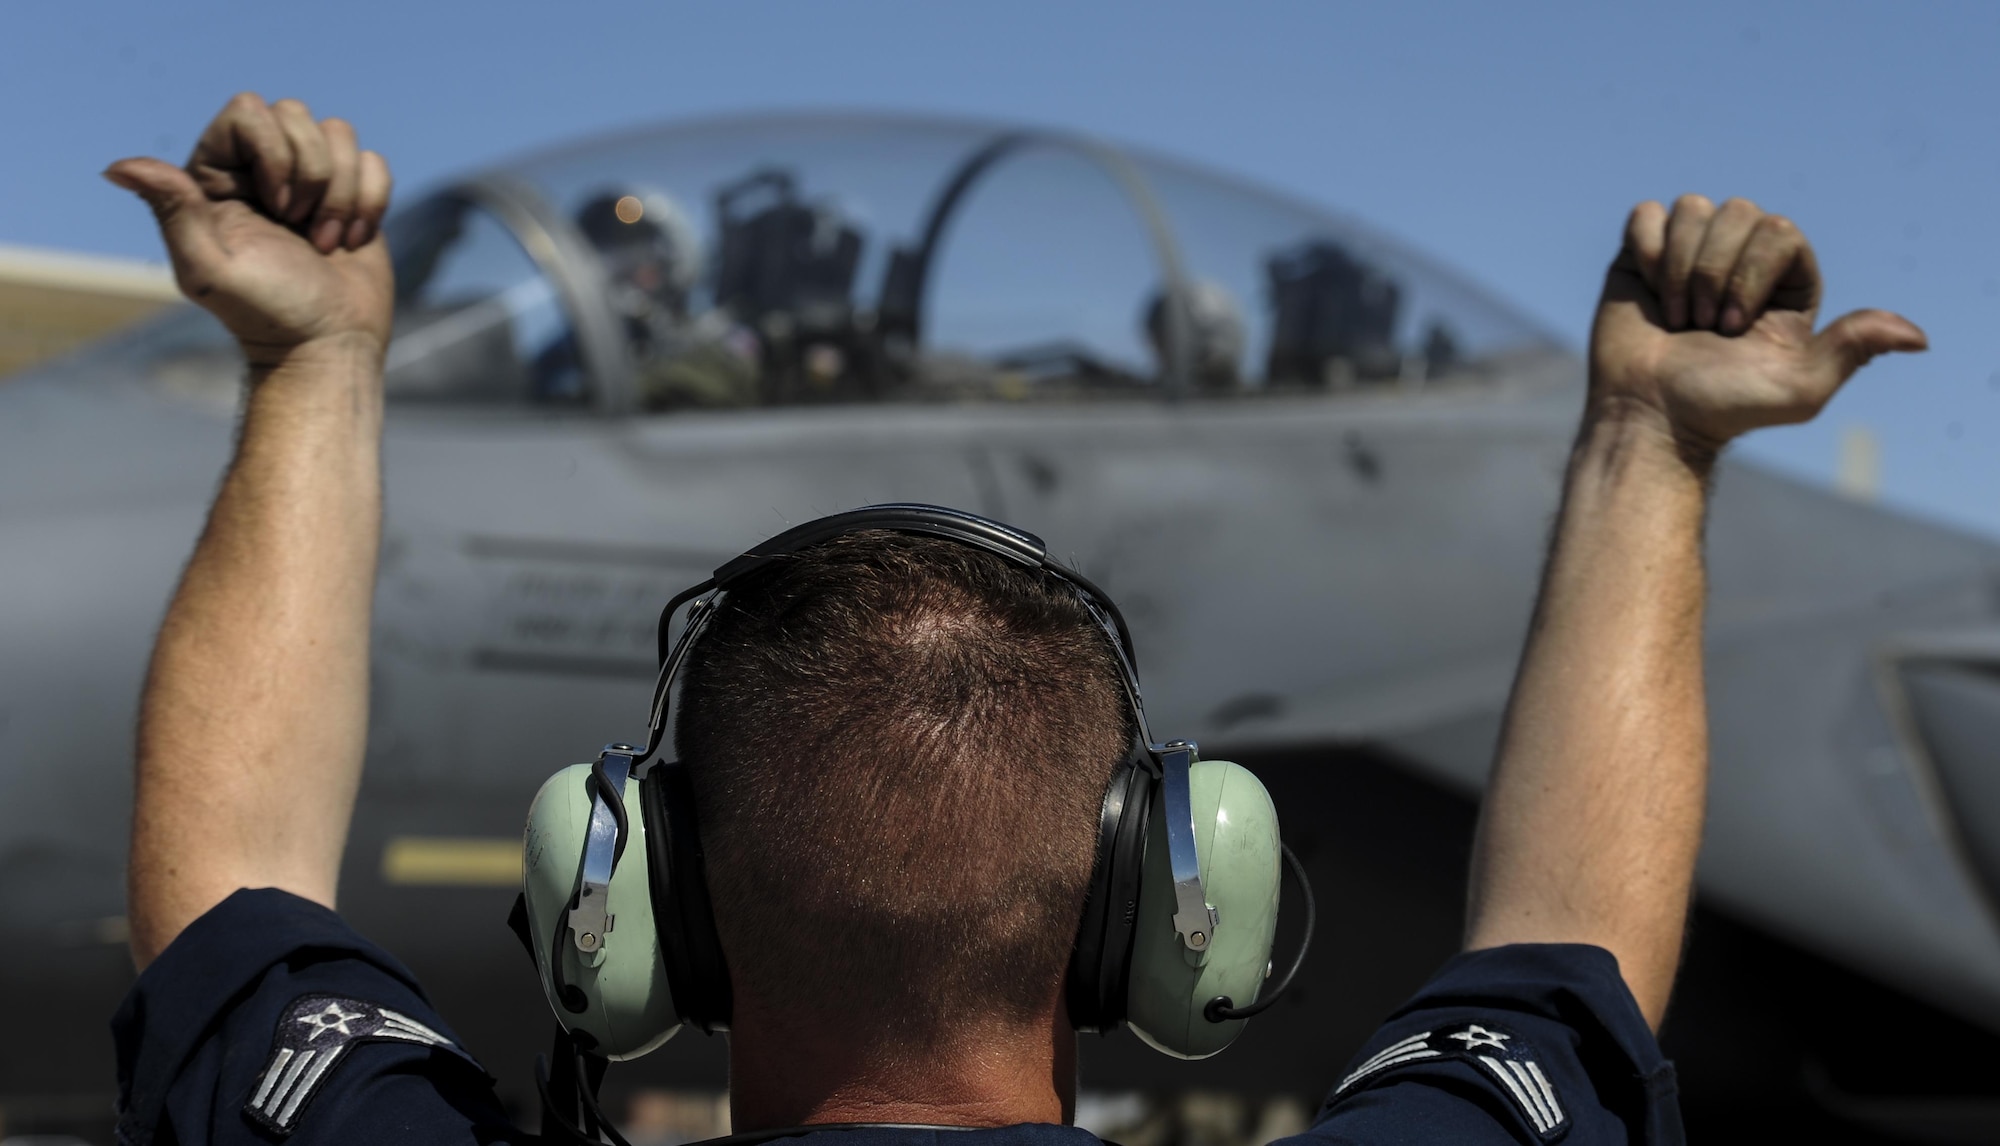 Senior Airman Travus Merkel, 48th Aircraft Maintenance Squadron crew chief, Royal Air Force Lakenheath, England, signals to the pilot of an F-15E Strike Eagle at Nellis Air Force Base, Nev. Sept. 9, 2016. During exercise execution, Green Flag staff direct, monitor, and instruct visiting units in the conduct of air operations in support of ground forces. (U.S. Air Force photo by Airman 1st Class Kevin Tanenbaum/Released)